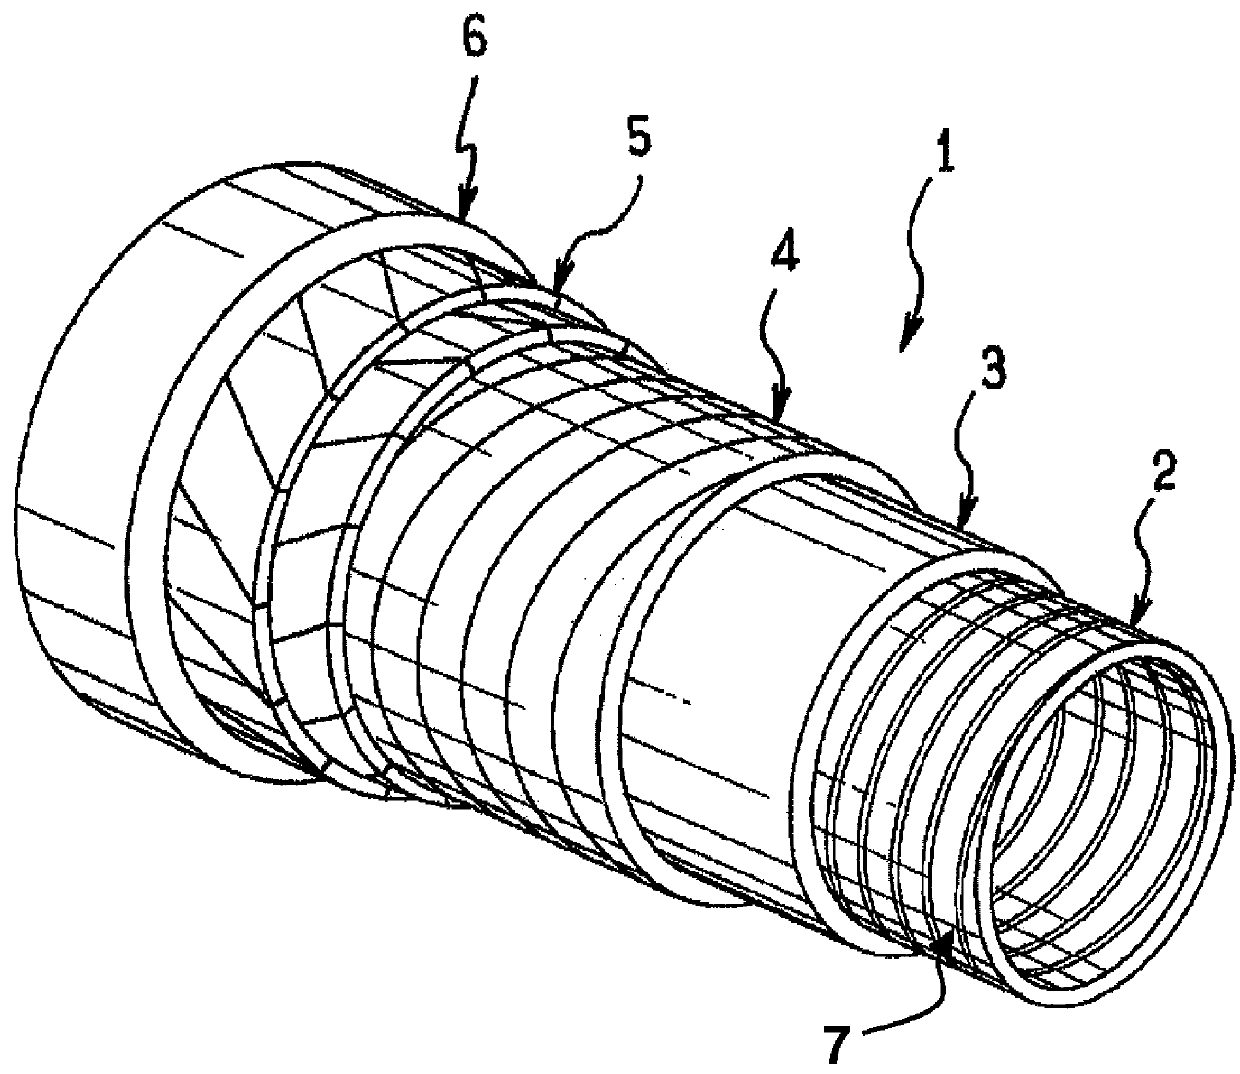 Flexible pipe for conveying hydrocarbons having a high corrosion resistance, and method for making same